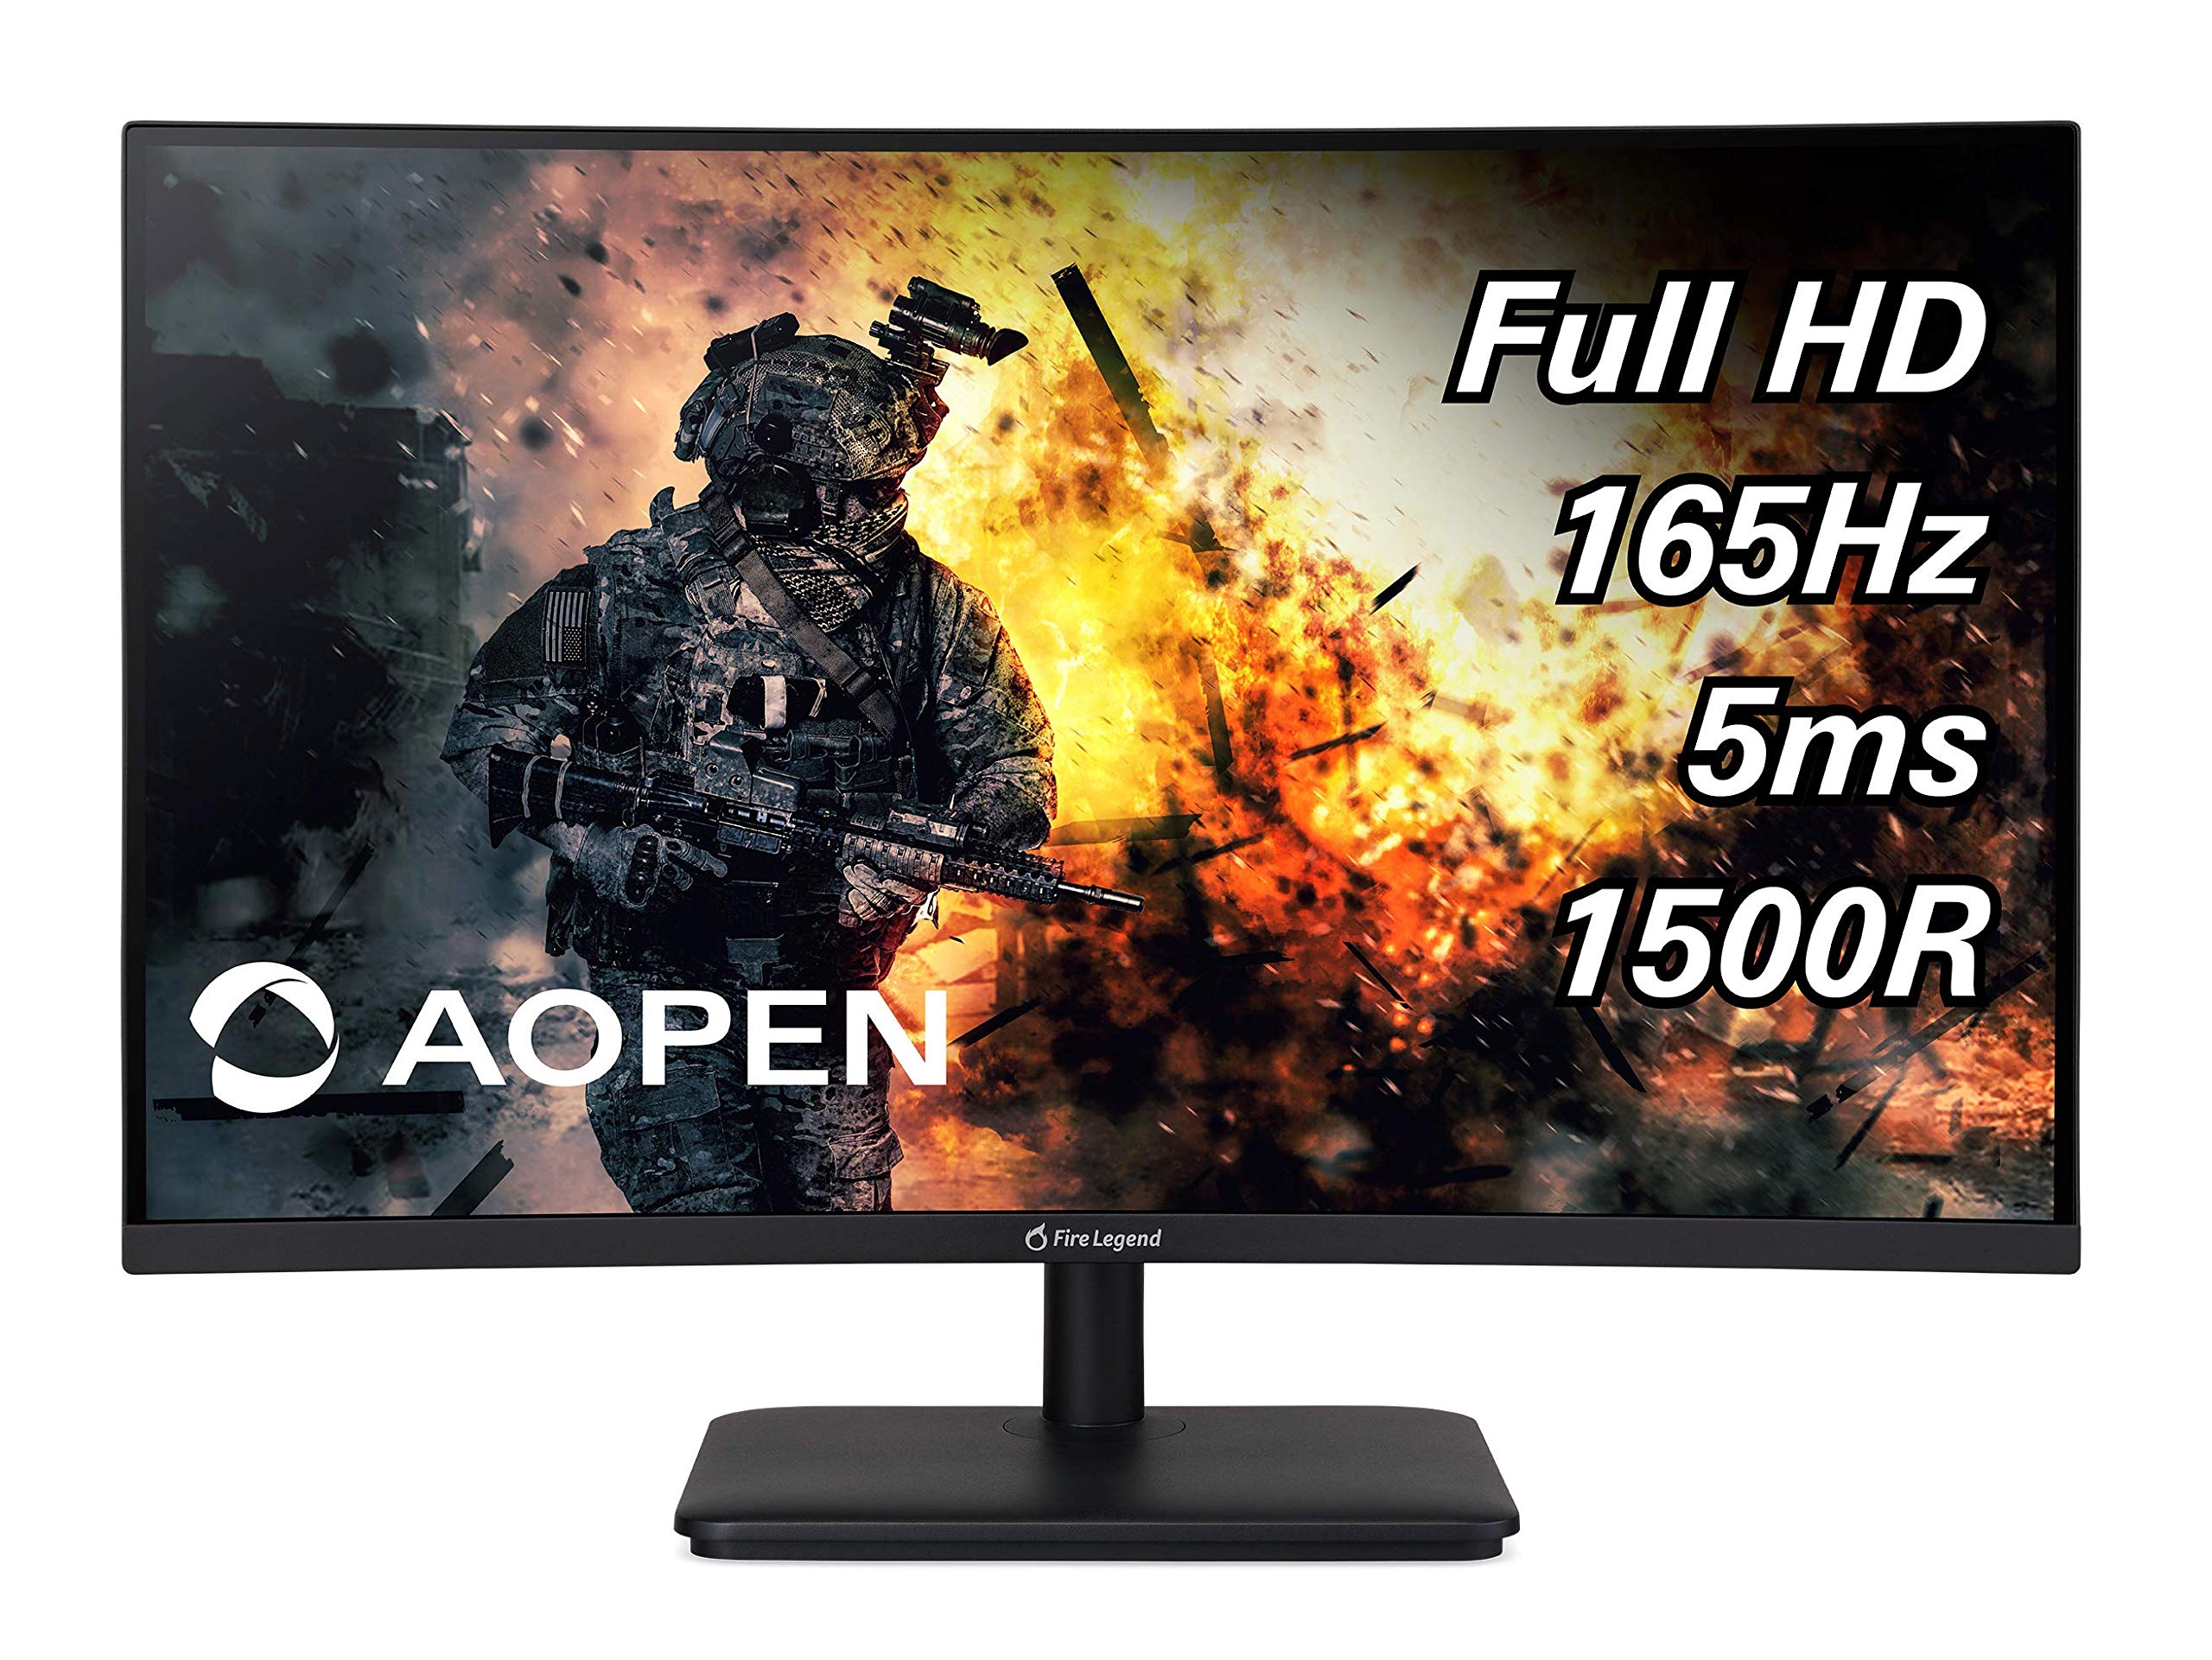 AOPEN Curved Zero-Frame Full HD (1920 x 1080) Gaming Monitor | AMD FreeSync Technology | Up to 75Hz